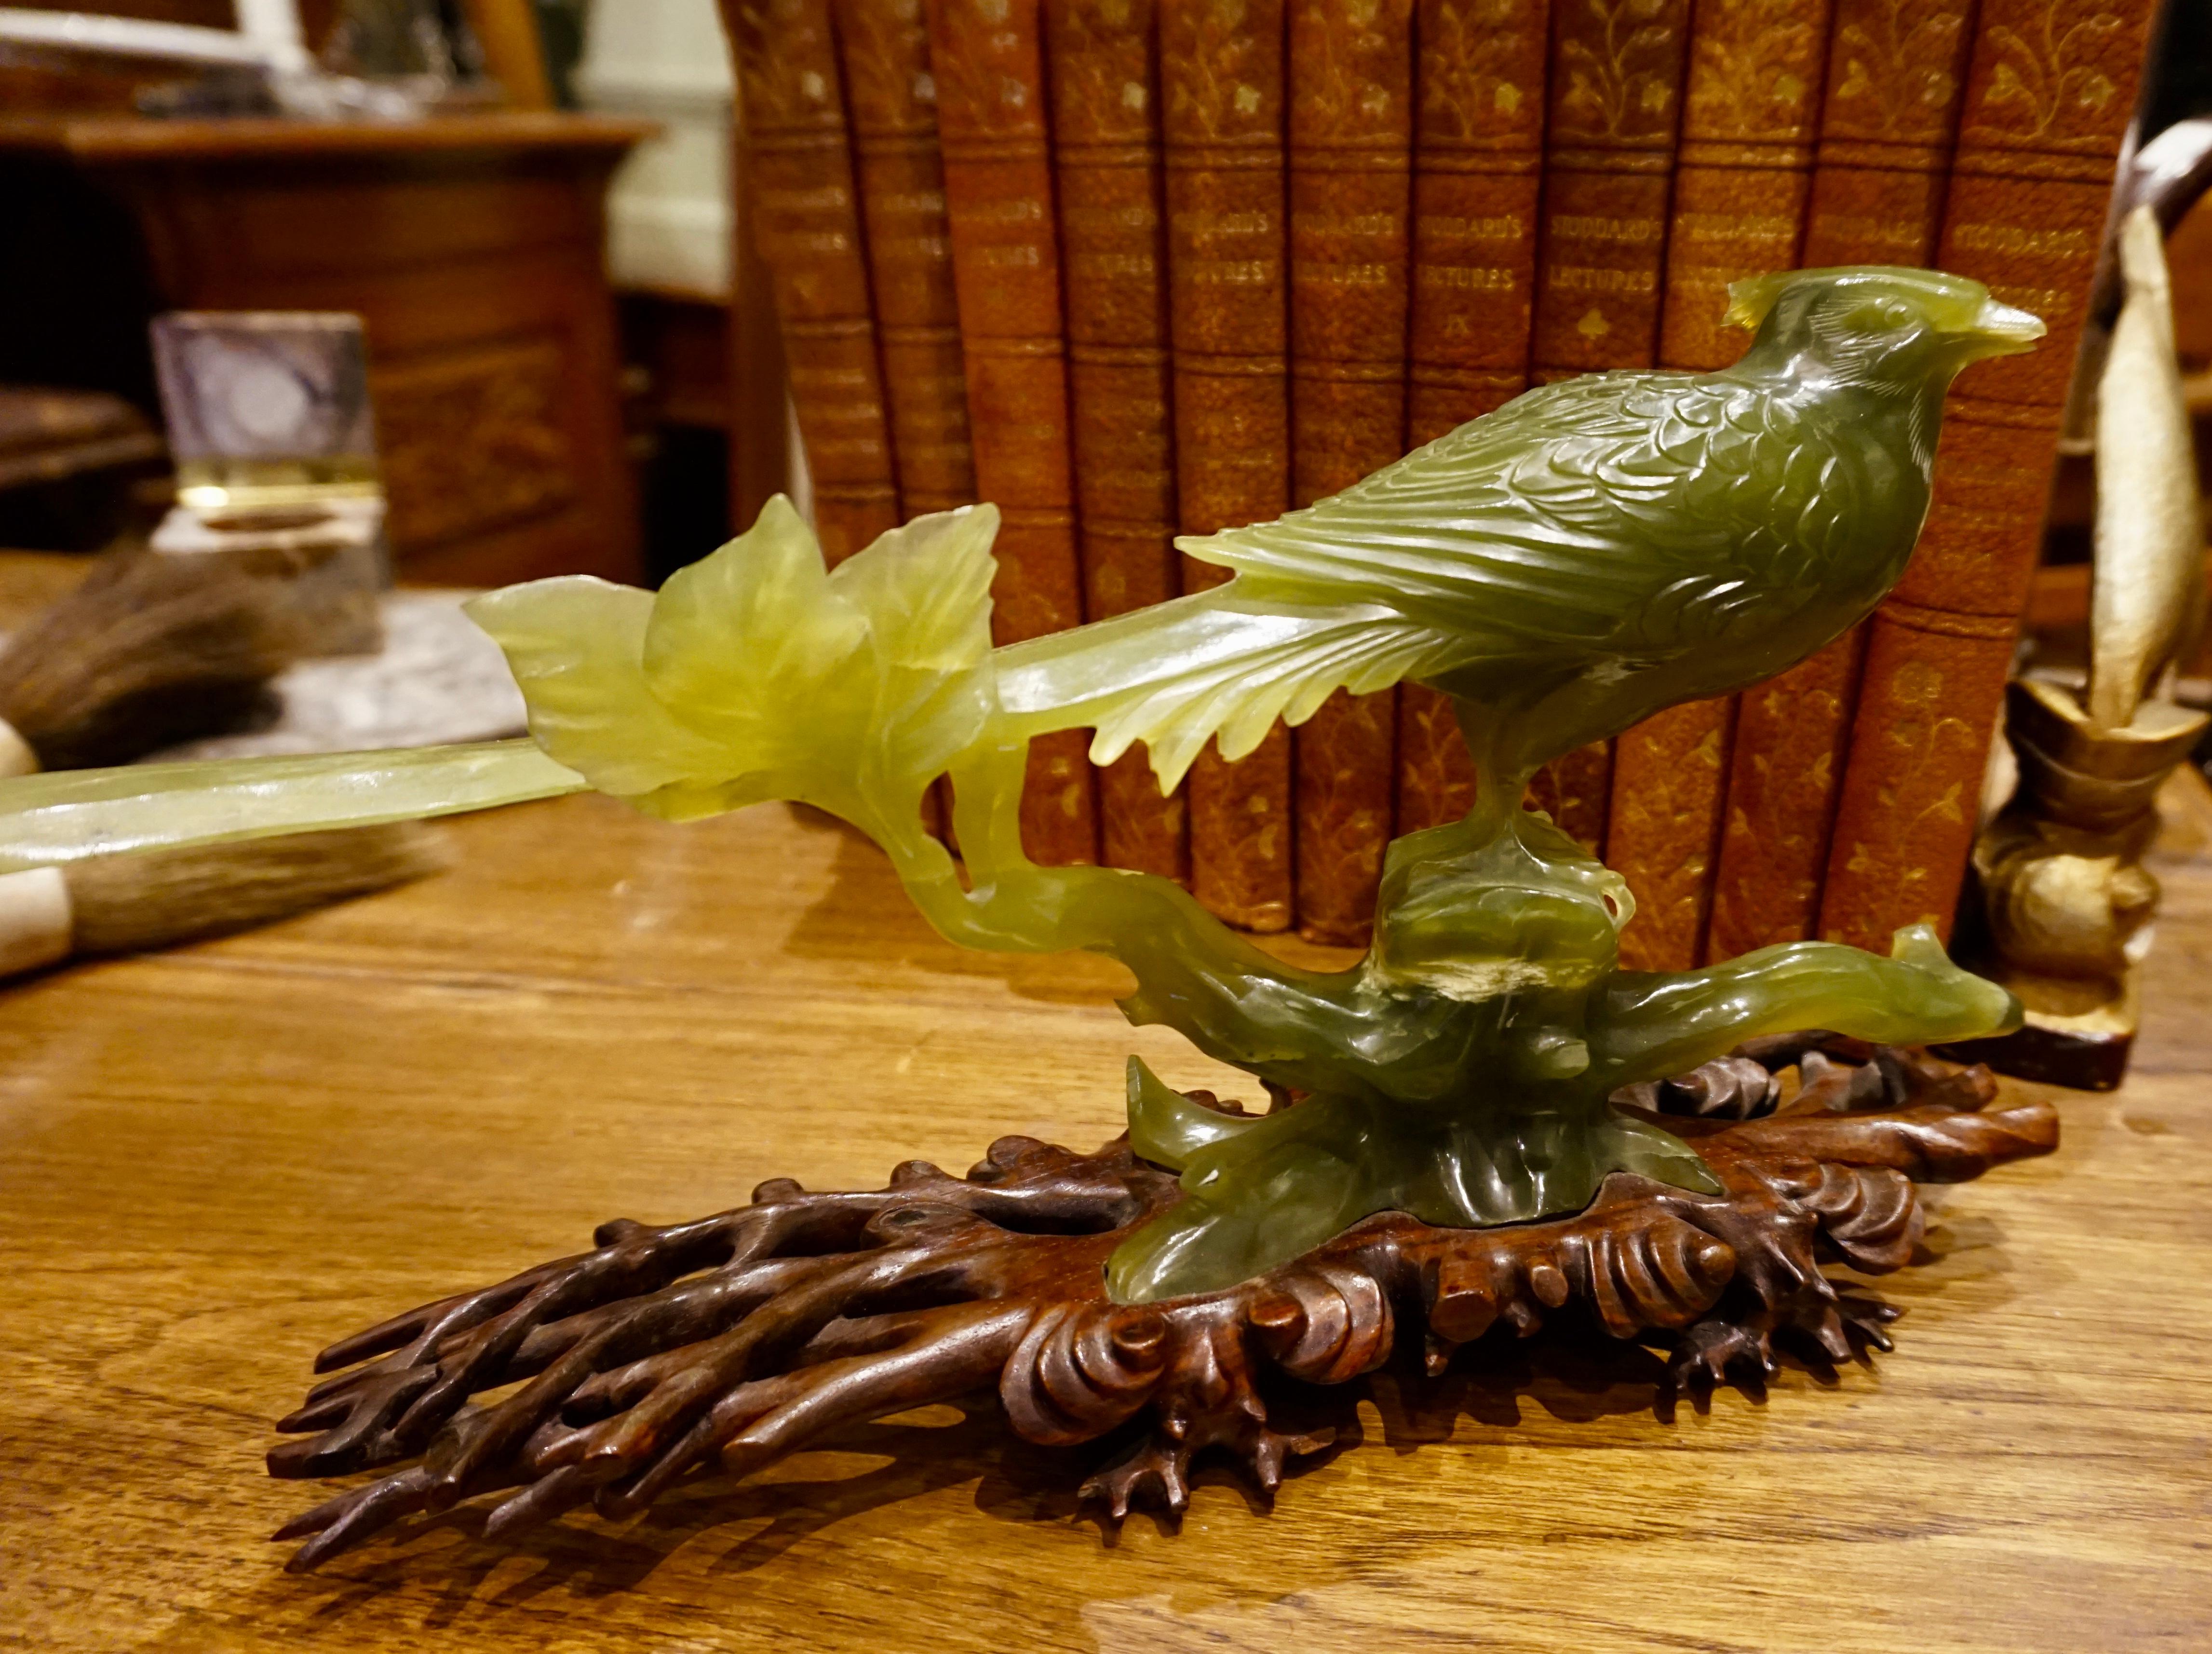 Chinese serpentine hand carved magpie, circa 1940s.
Singular carved magpie from a single piece of serpentine with incredible detail down to the talons. Sits on original hand carved rosewood stand. One small chip behind head feather consistent with